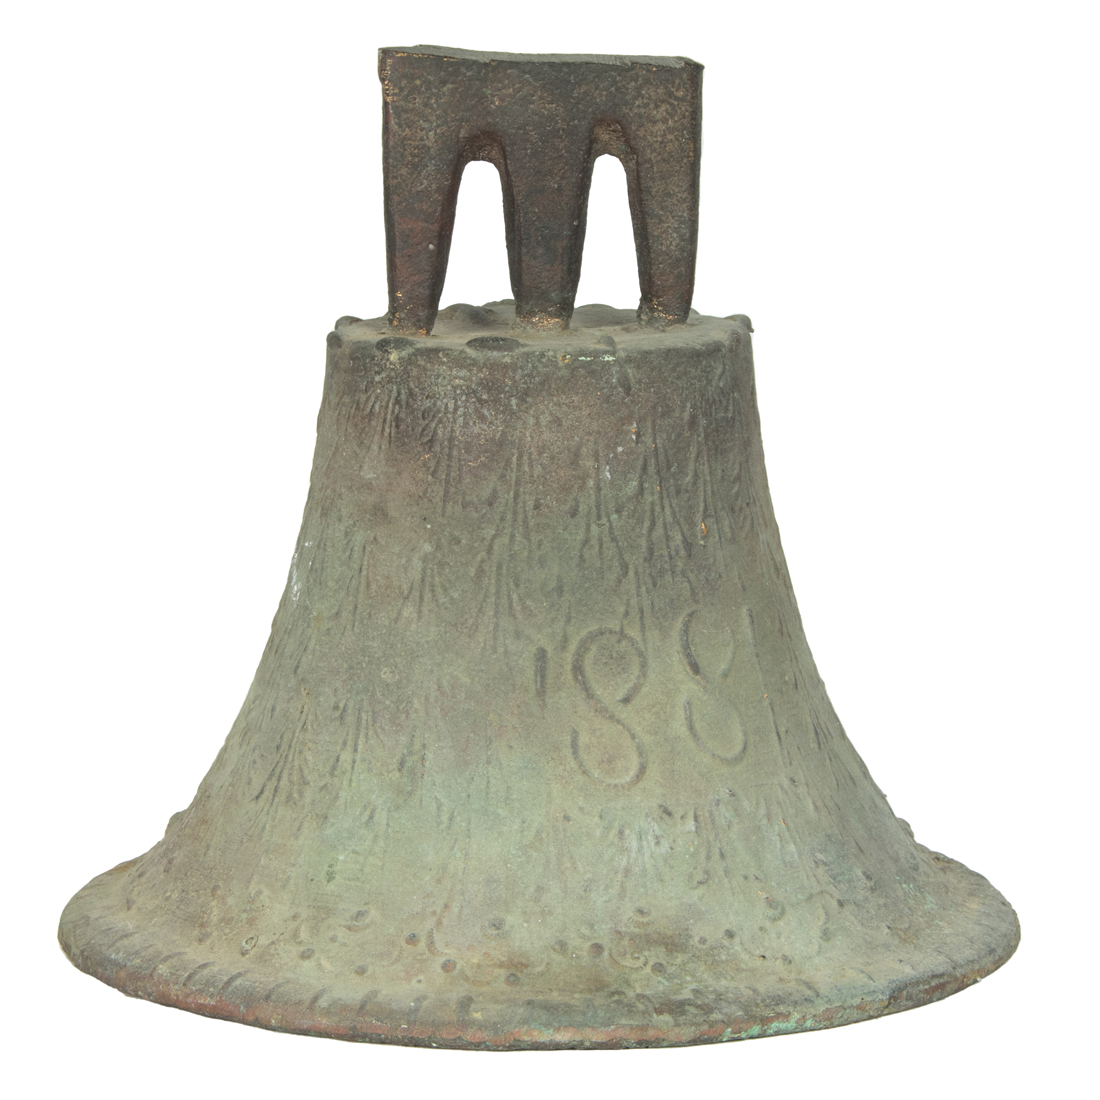 A SPANISH COLONIAL BRONZE MISSION 3b413a